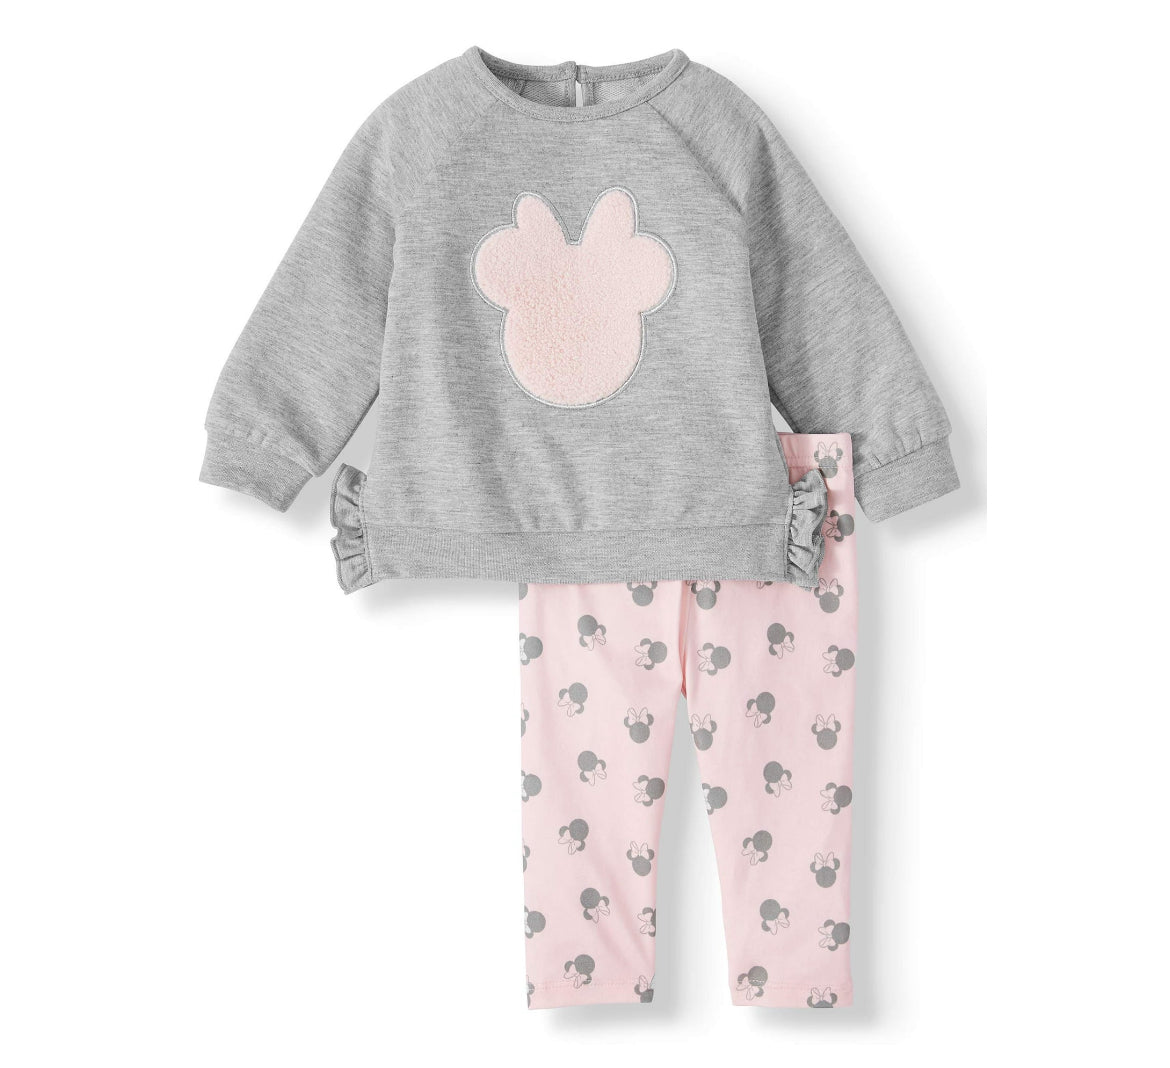 Disney Minnie Mouse Baby Girl Long Sleeve French Terry Top and Legging, 2pc Outfit Set